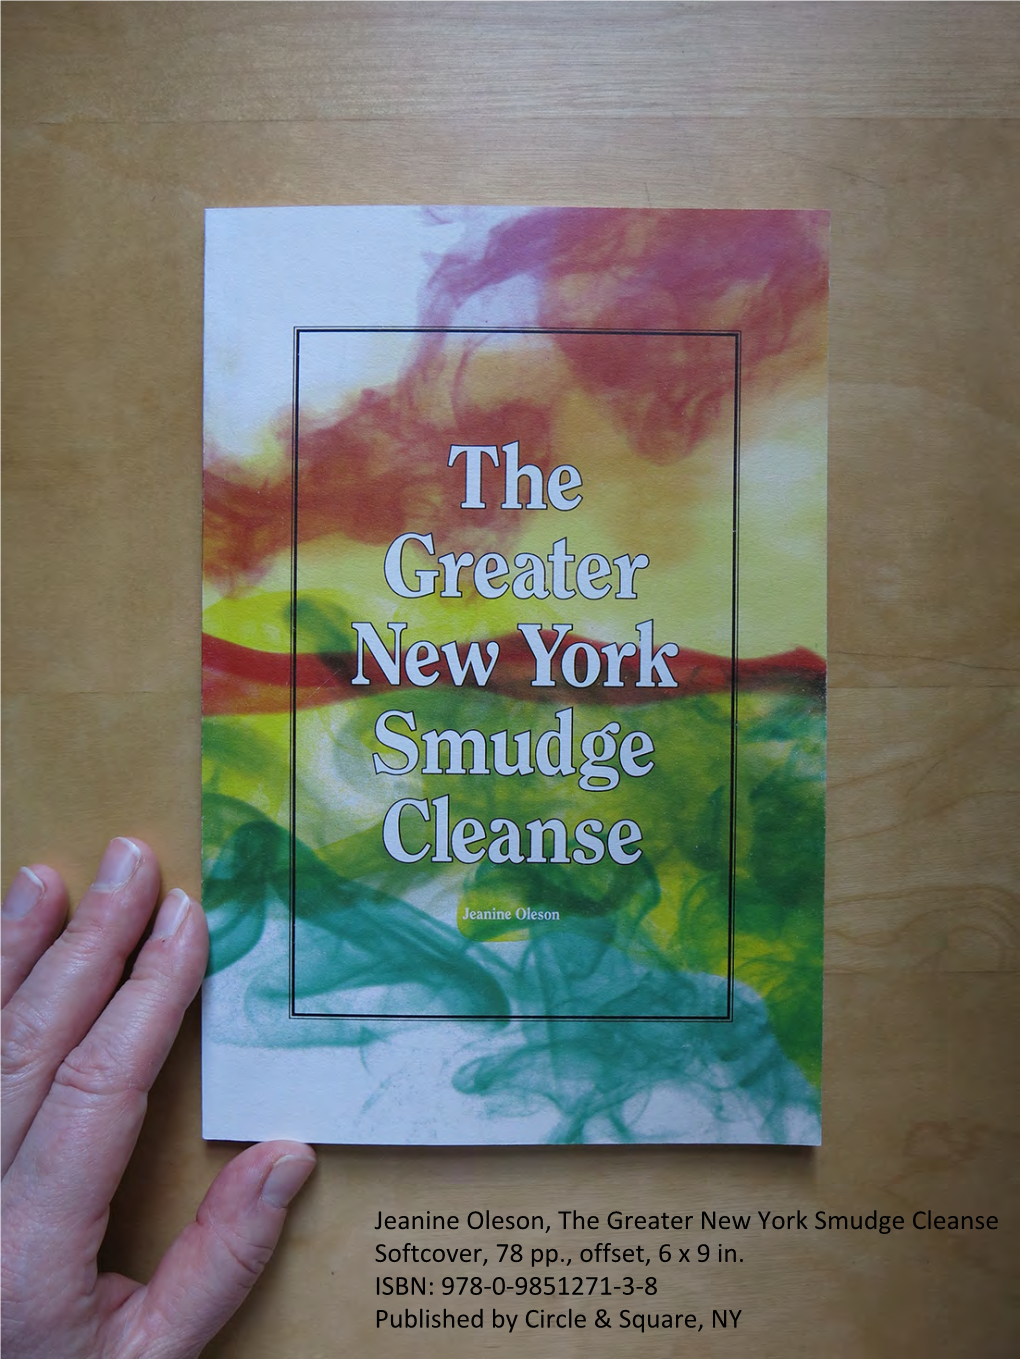 Jeanine Oleson, the Greater New York Smudge Cleanse Softcover